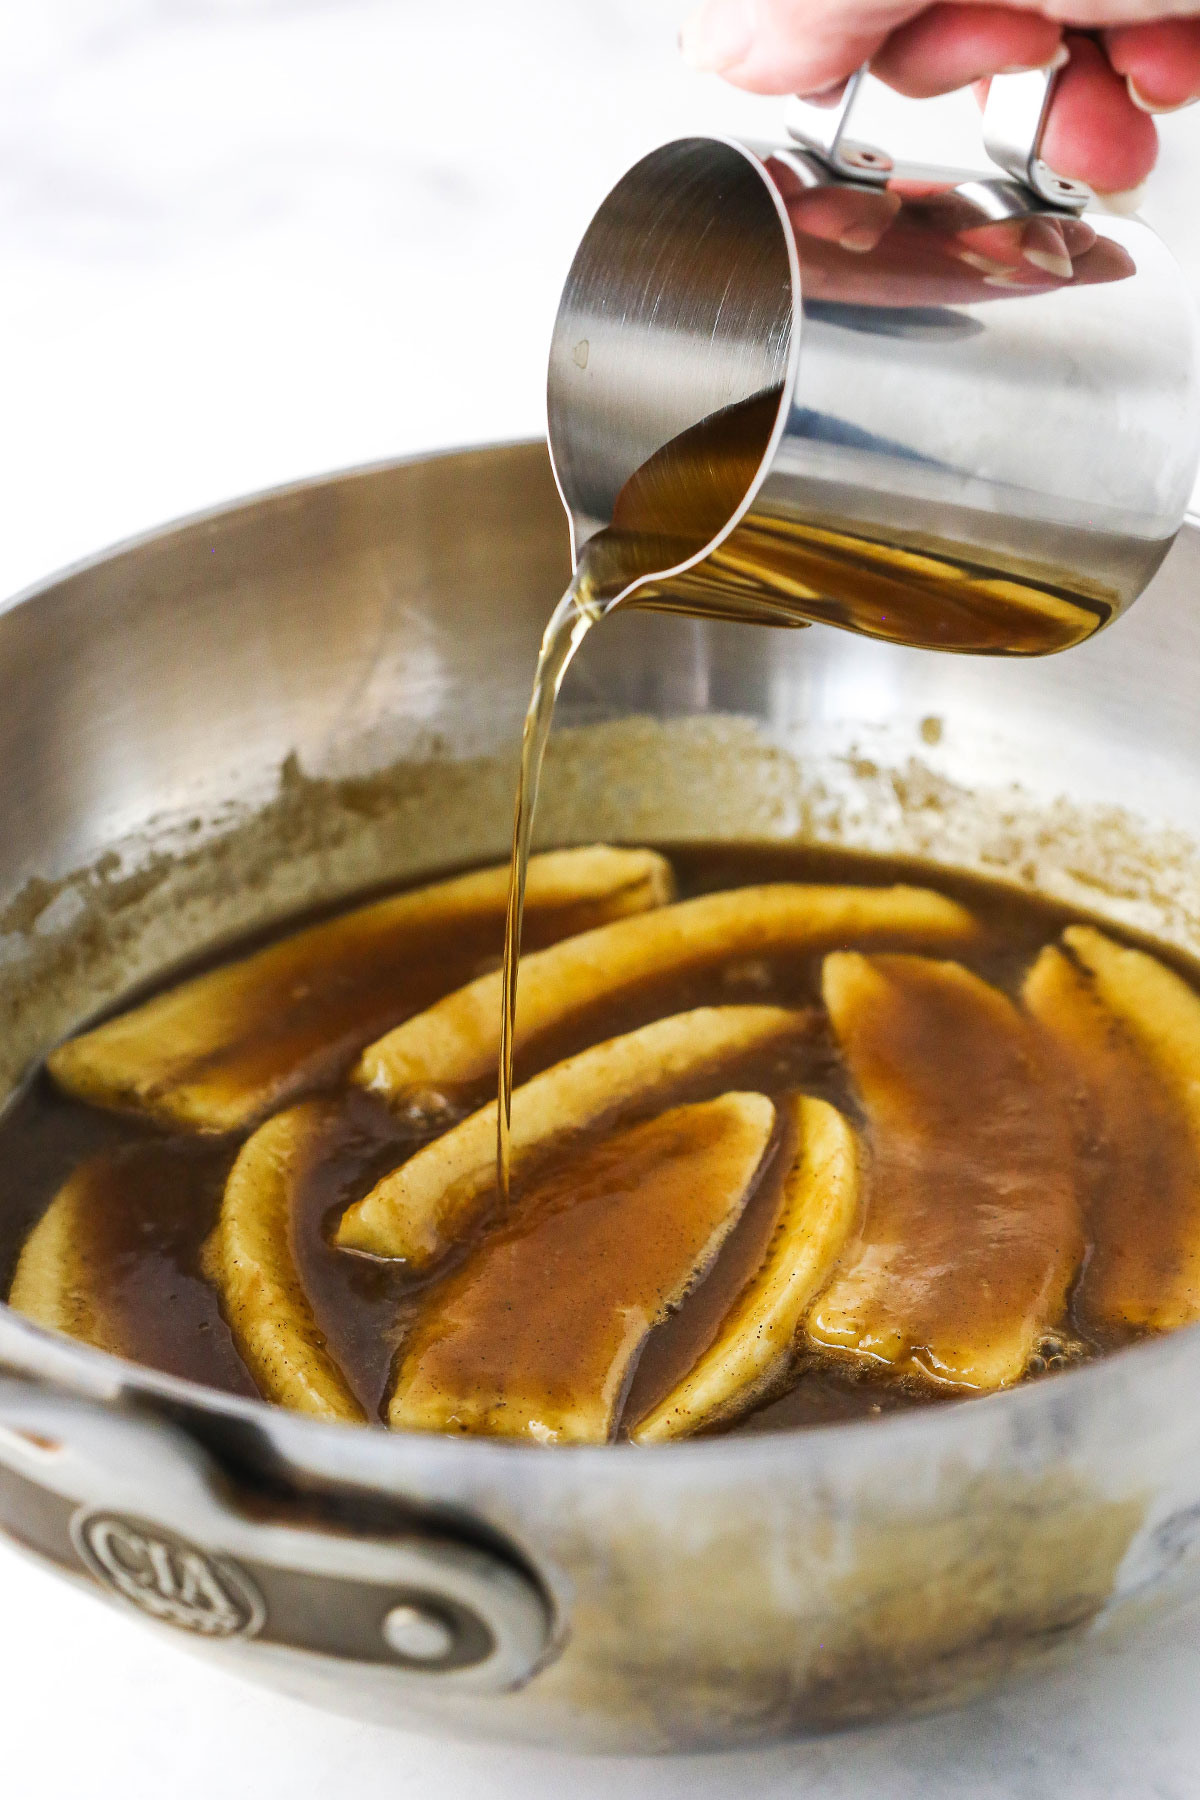 Three tablespoons of dark rum being poured over a skillet full of bananas foster